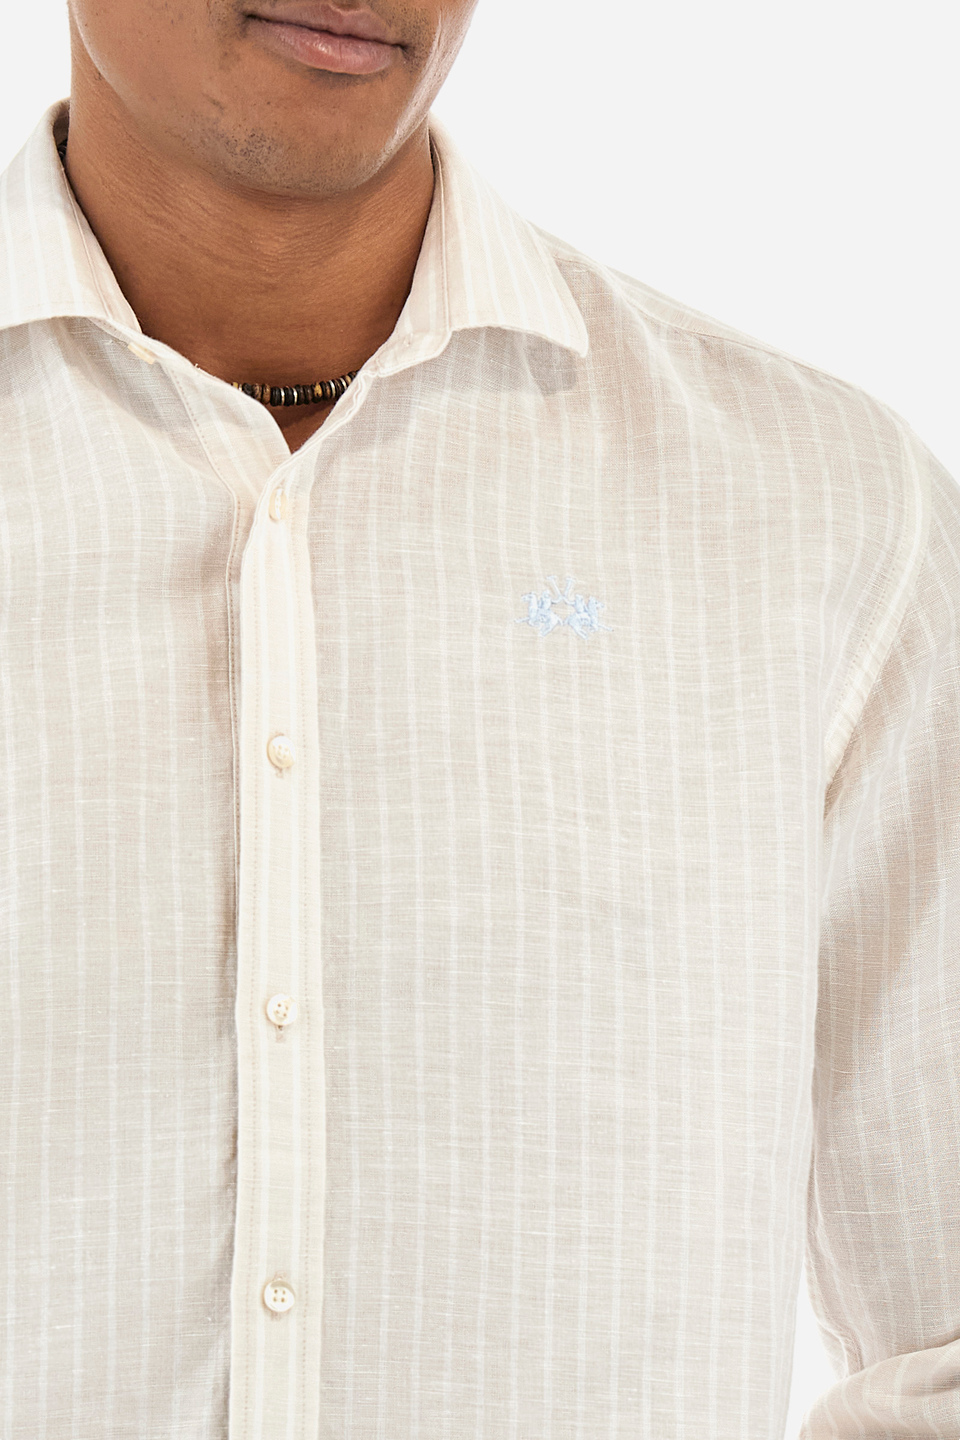 Striped patterned shirt in cotton and linen - Innocent | La Martina - Official Online Shop